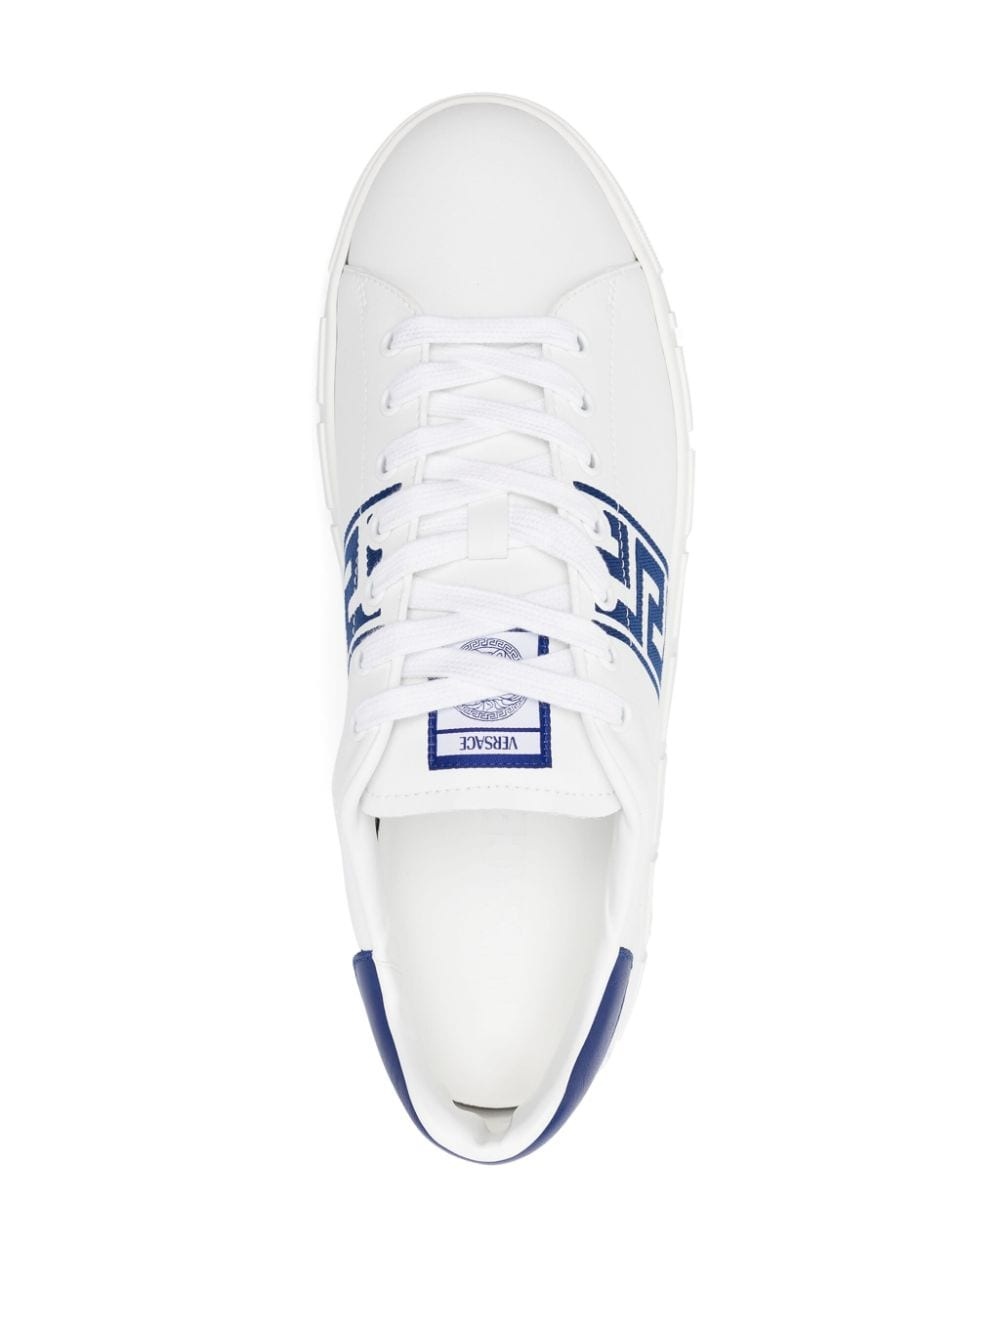 Greca-embroidery leather sneakers - 4